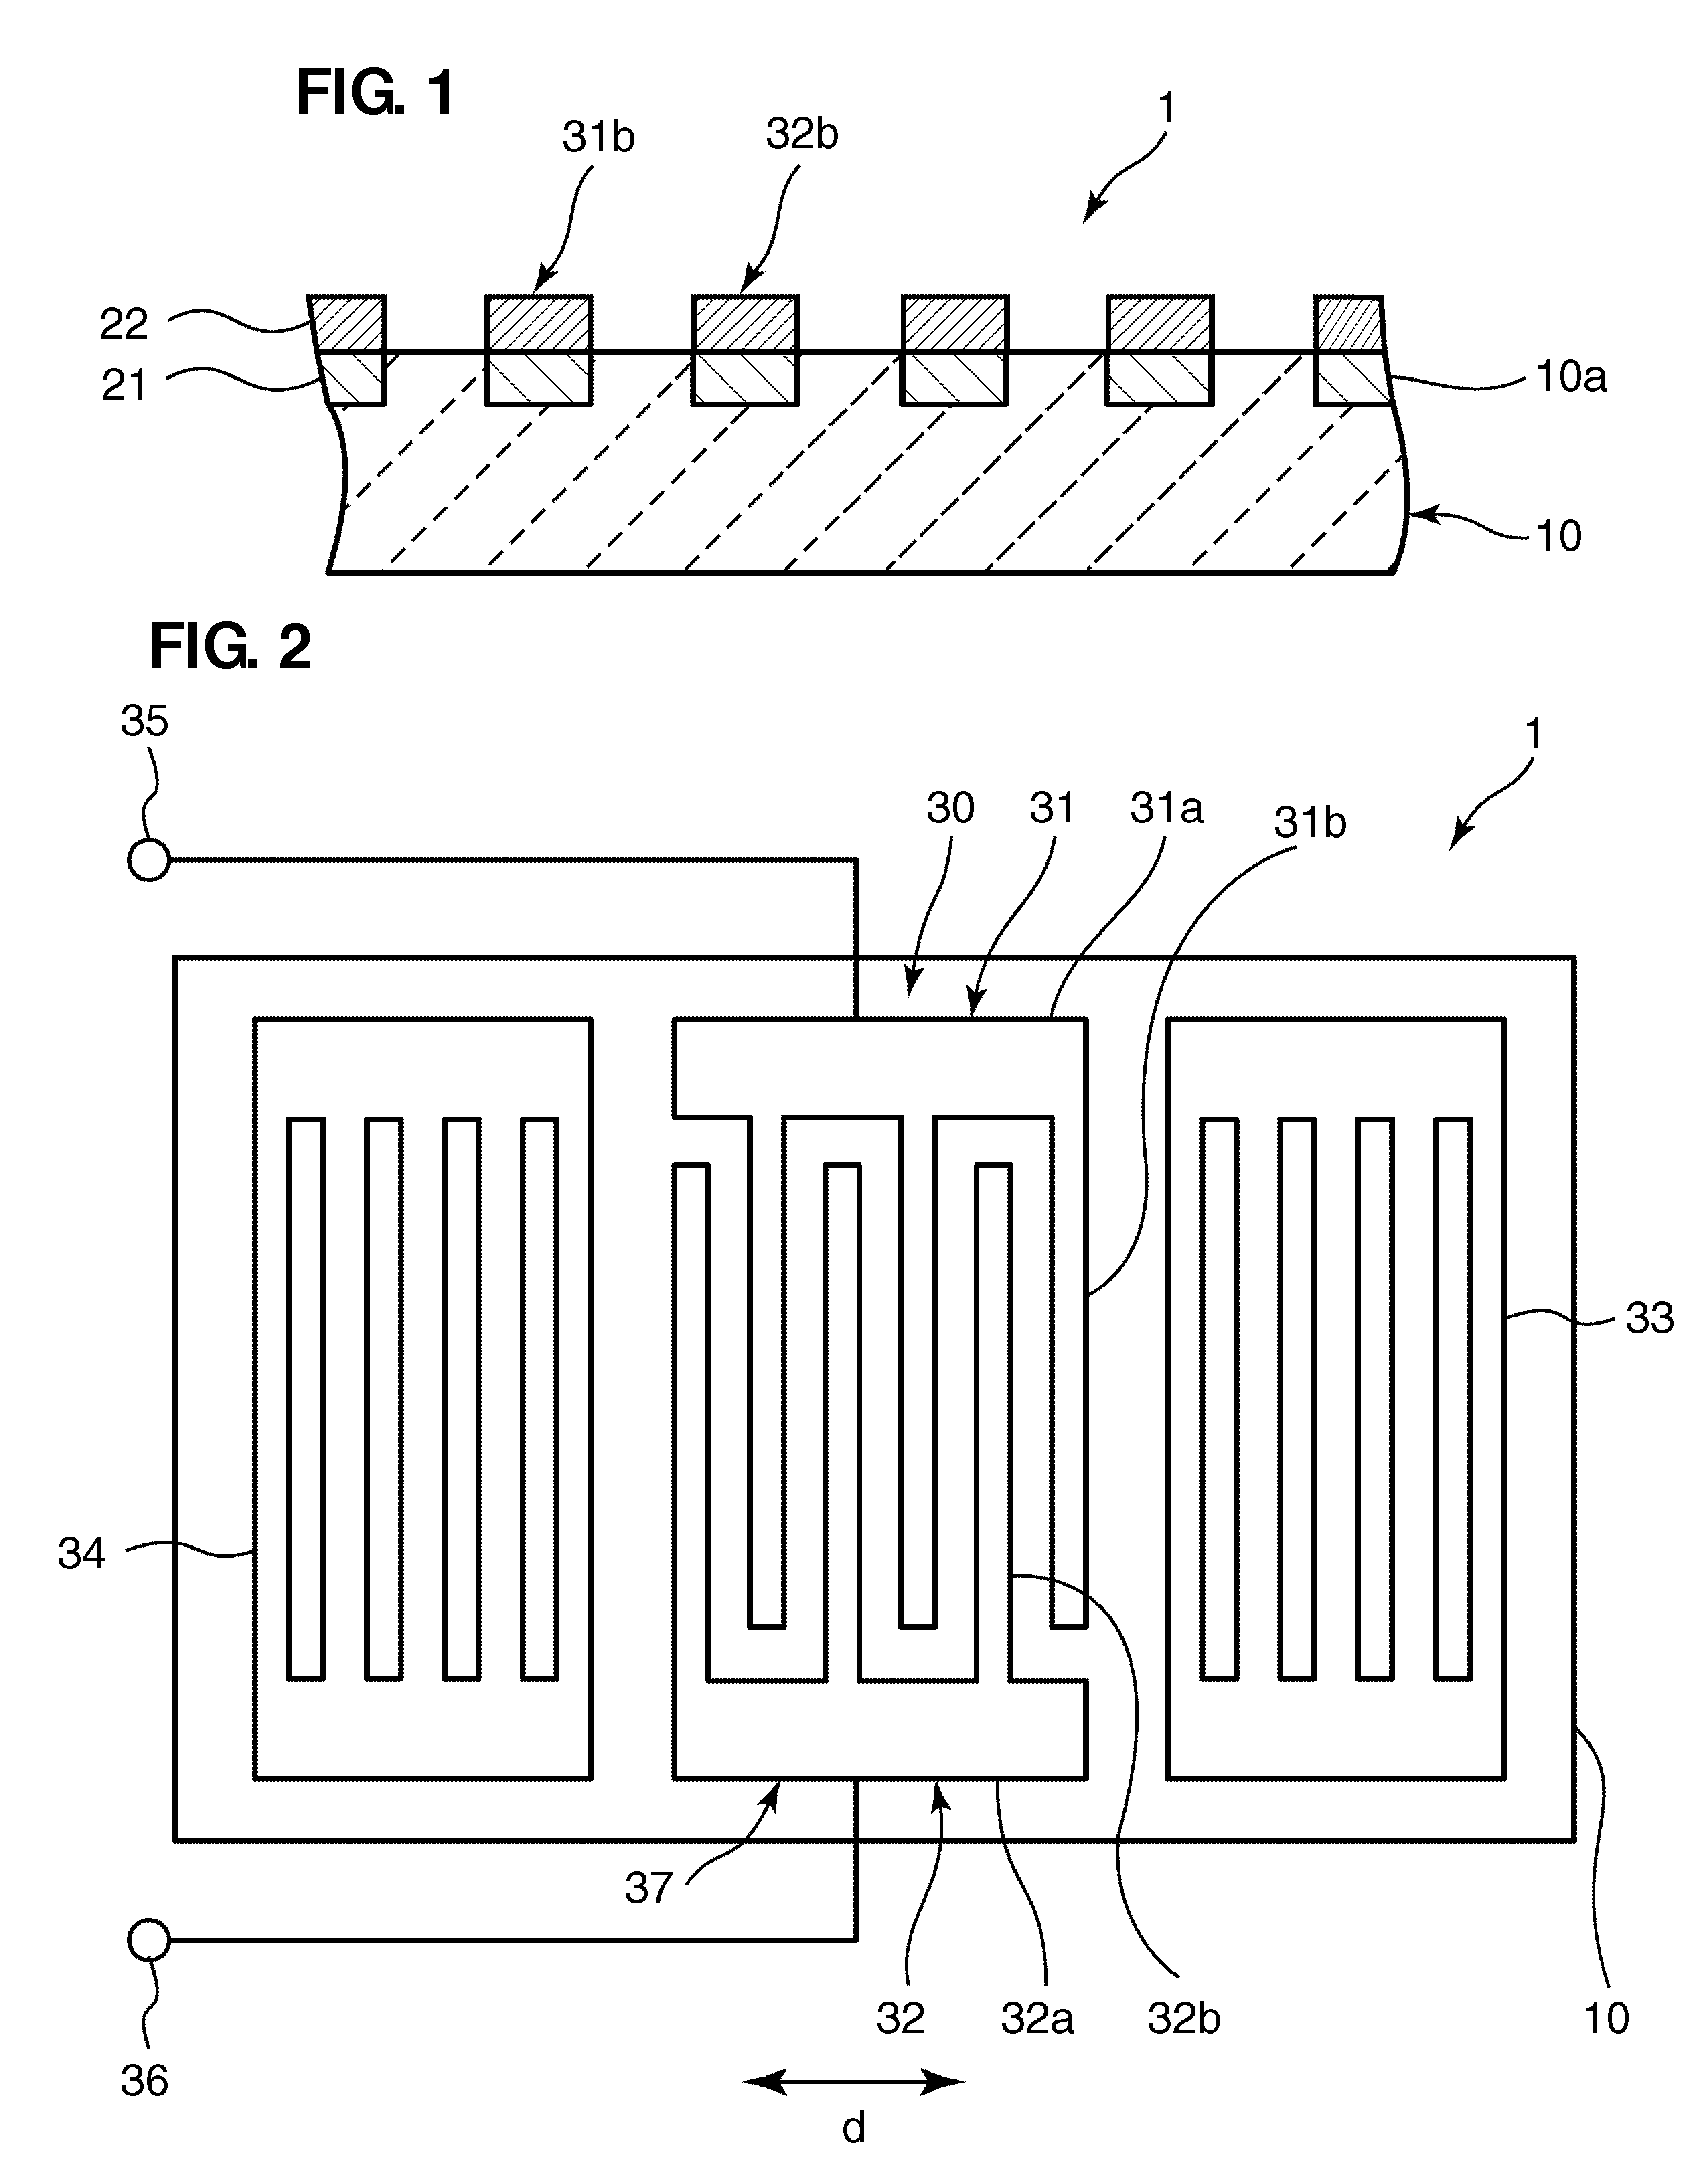 Surface acoustic wave device including electrode fingers partially disposed in grooves in a piezoelectric substrate